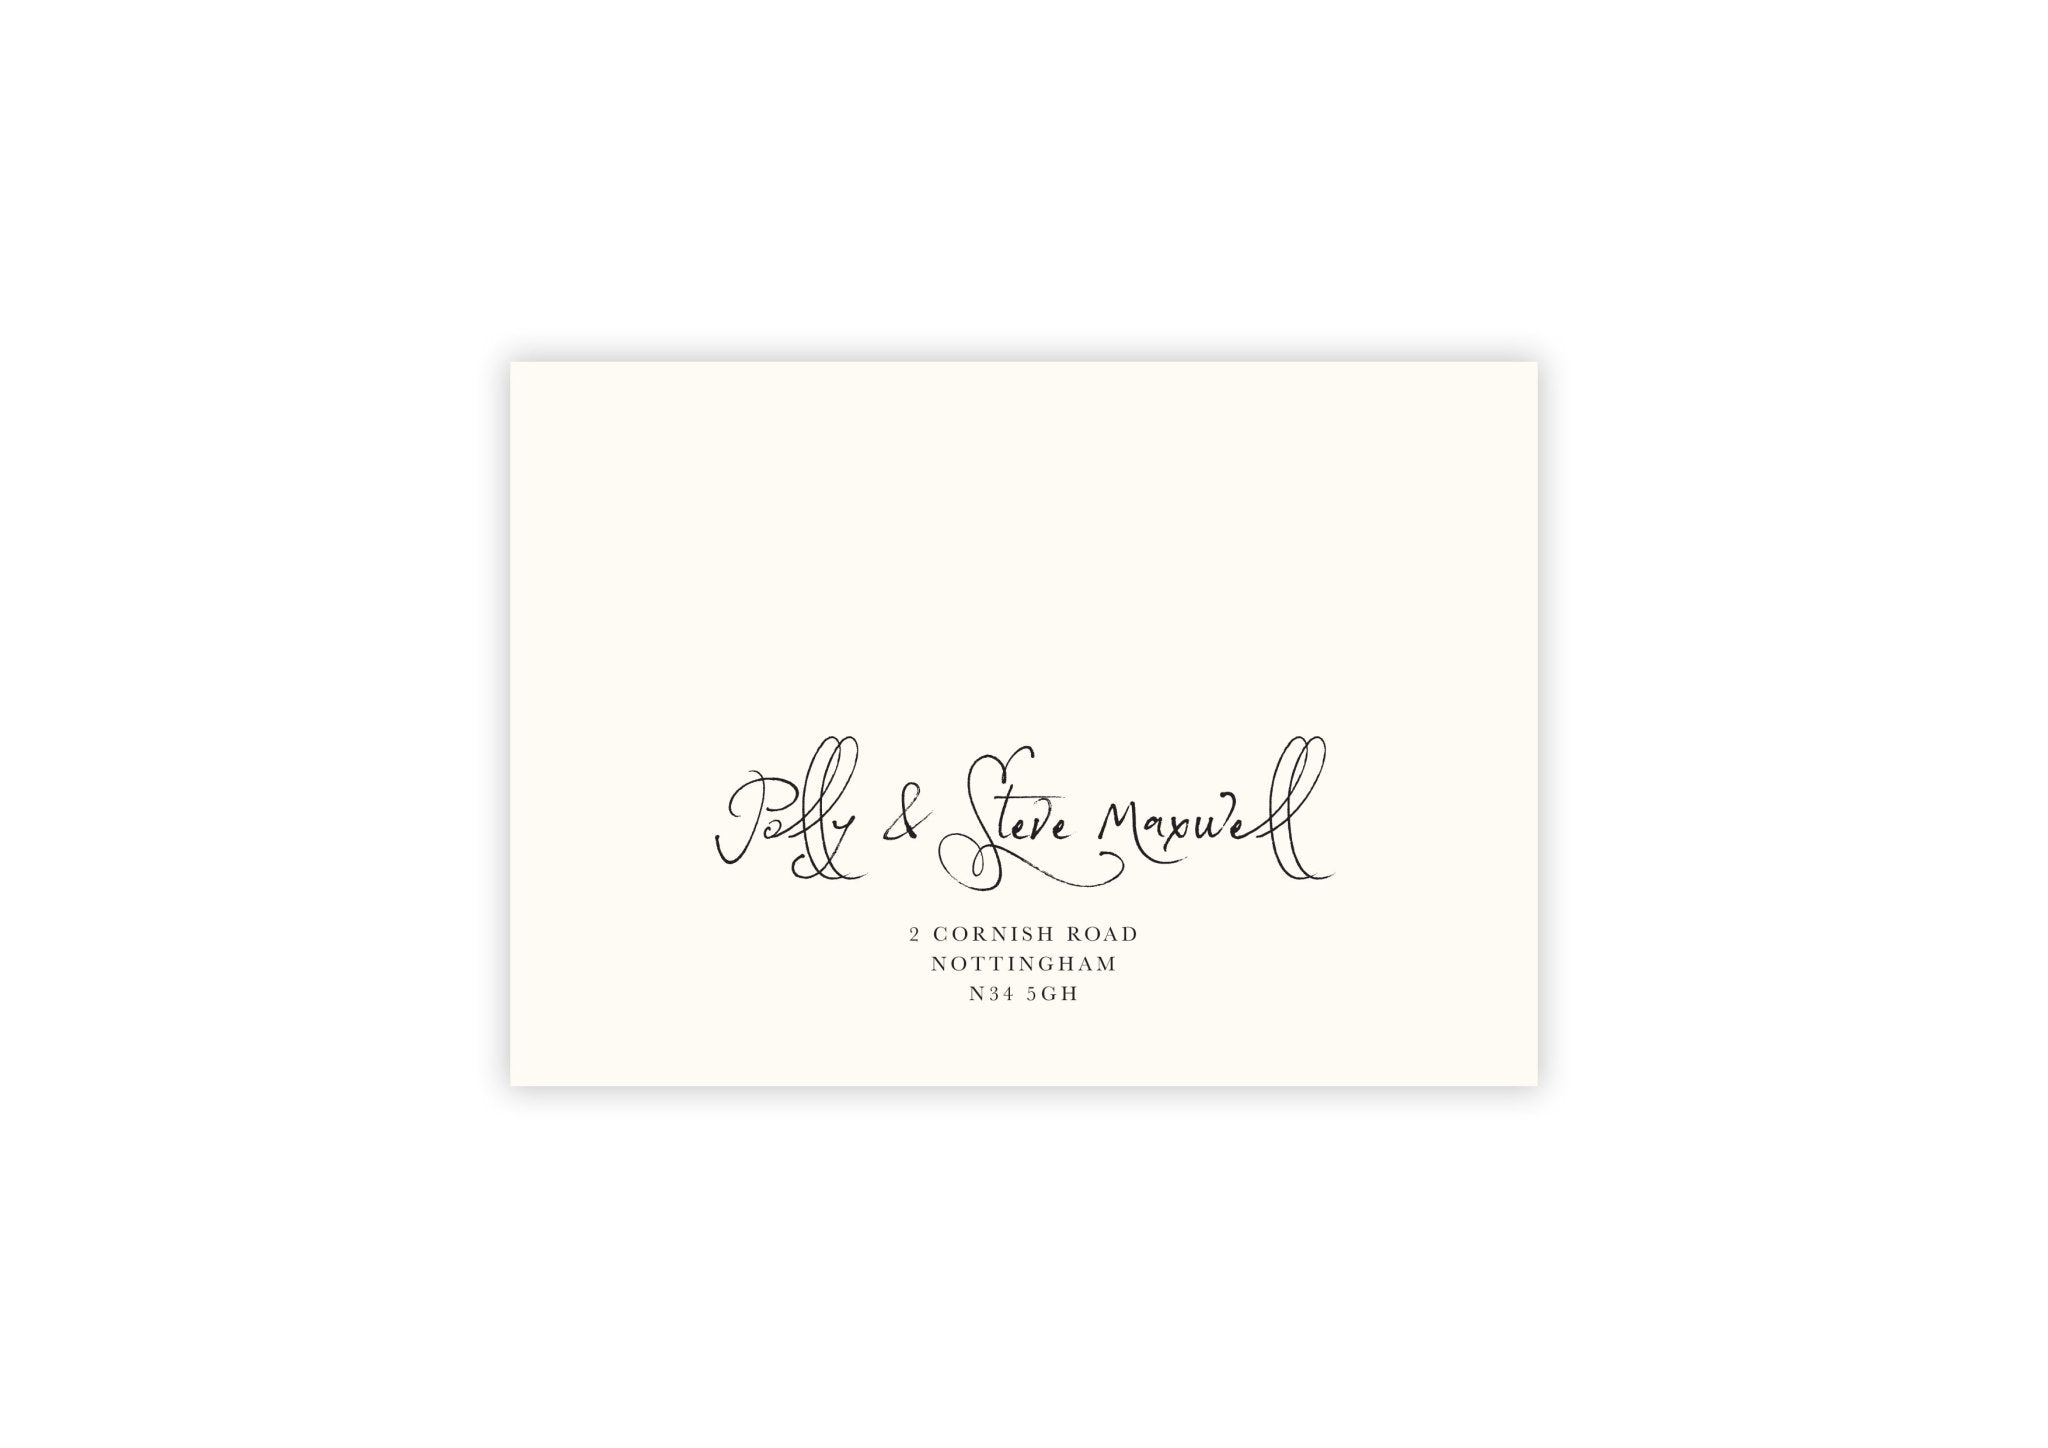 Soirée Romantique - Personalised Save The Date Envelope - Ten Story Stationery